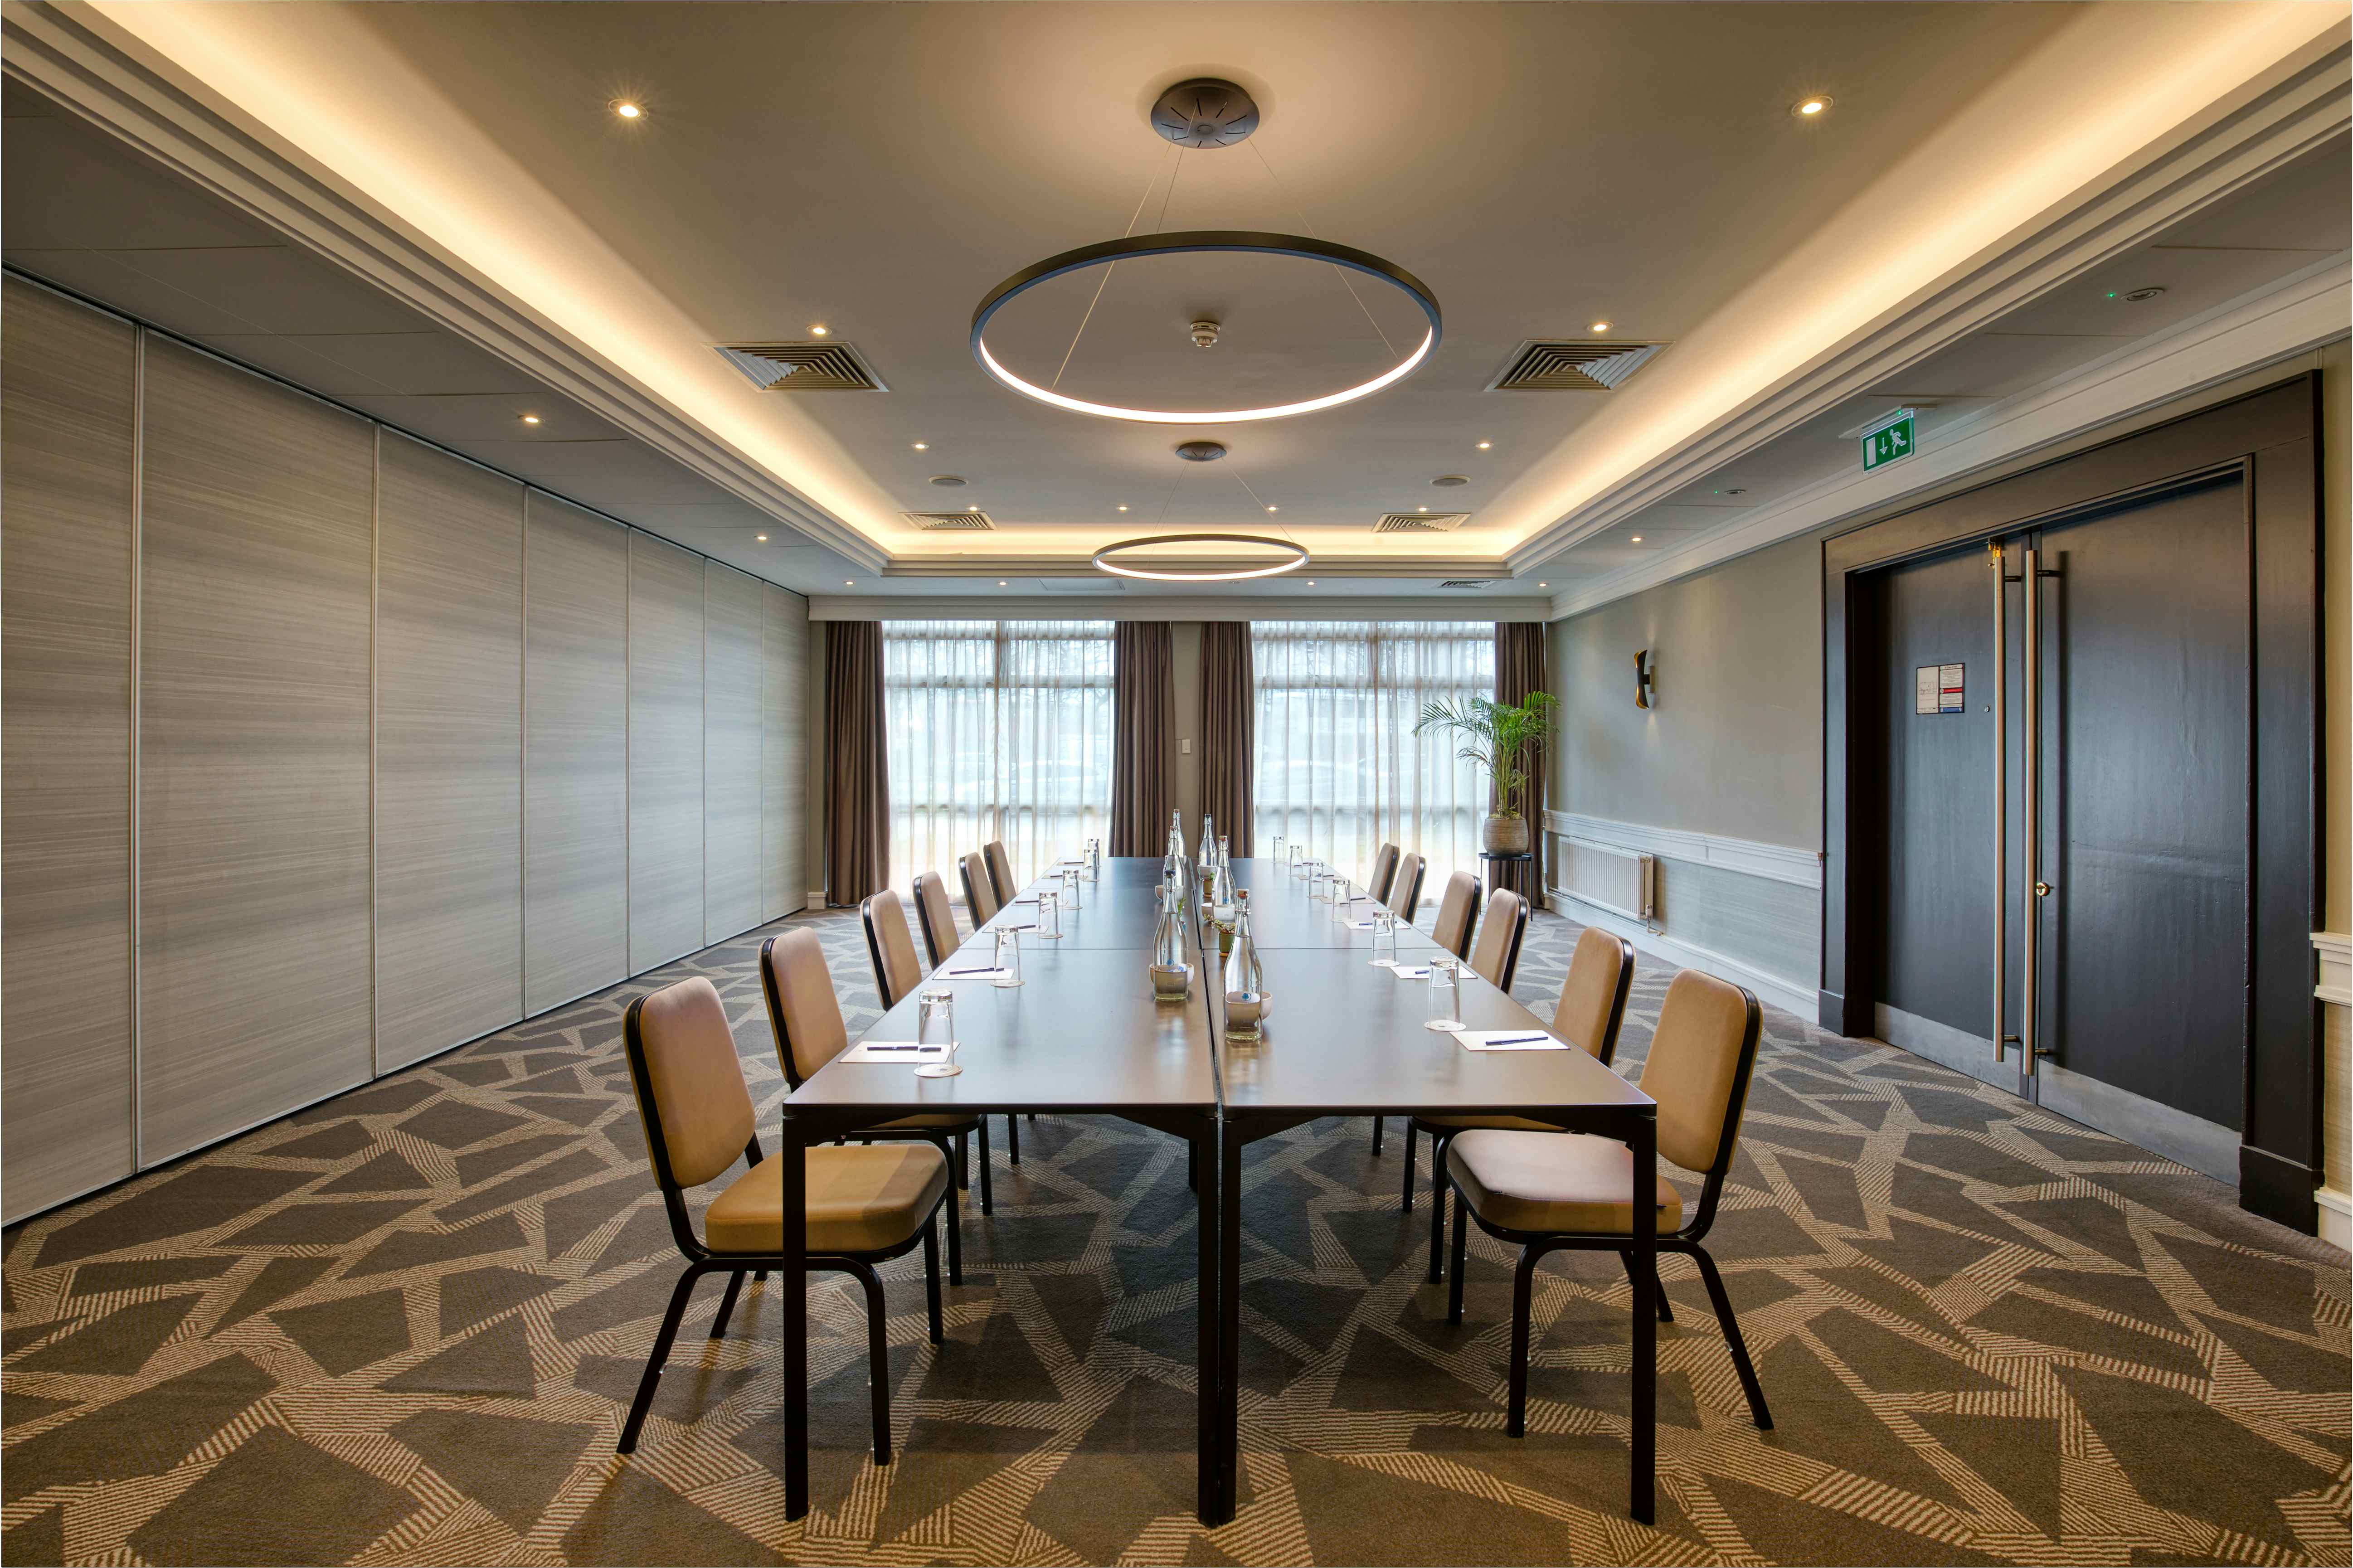 Perceval Suite, DoubleTree by Hilton London - Ealing